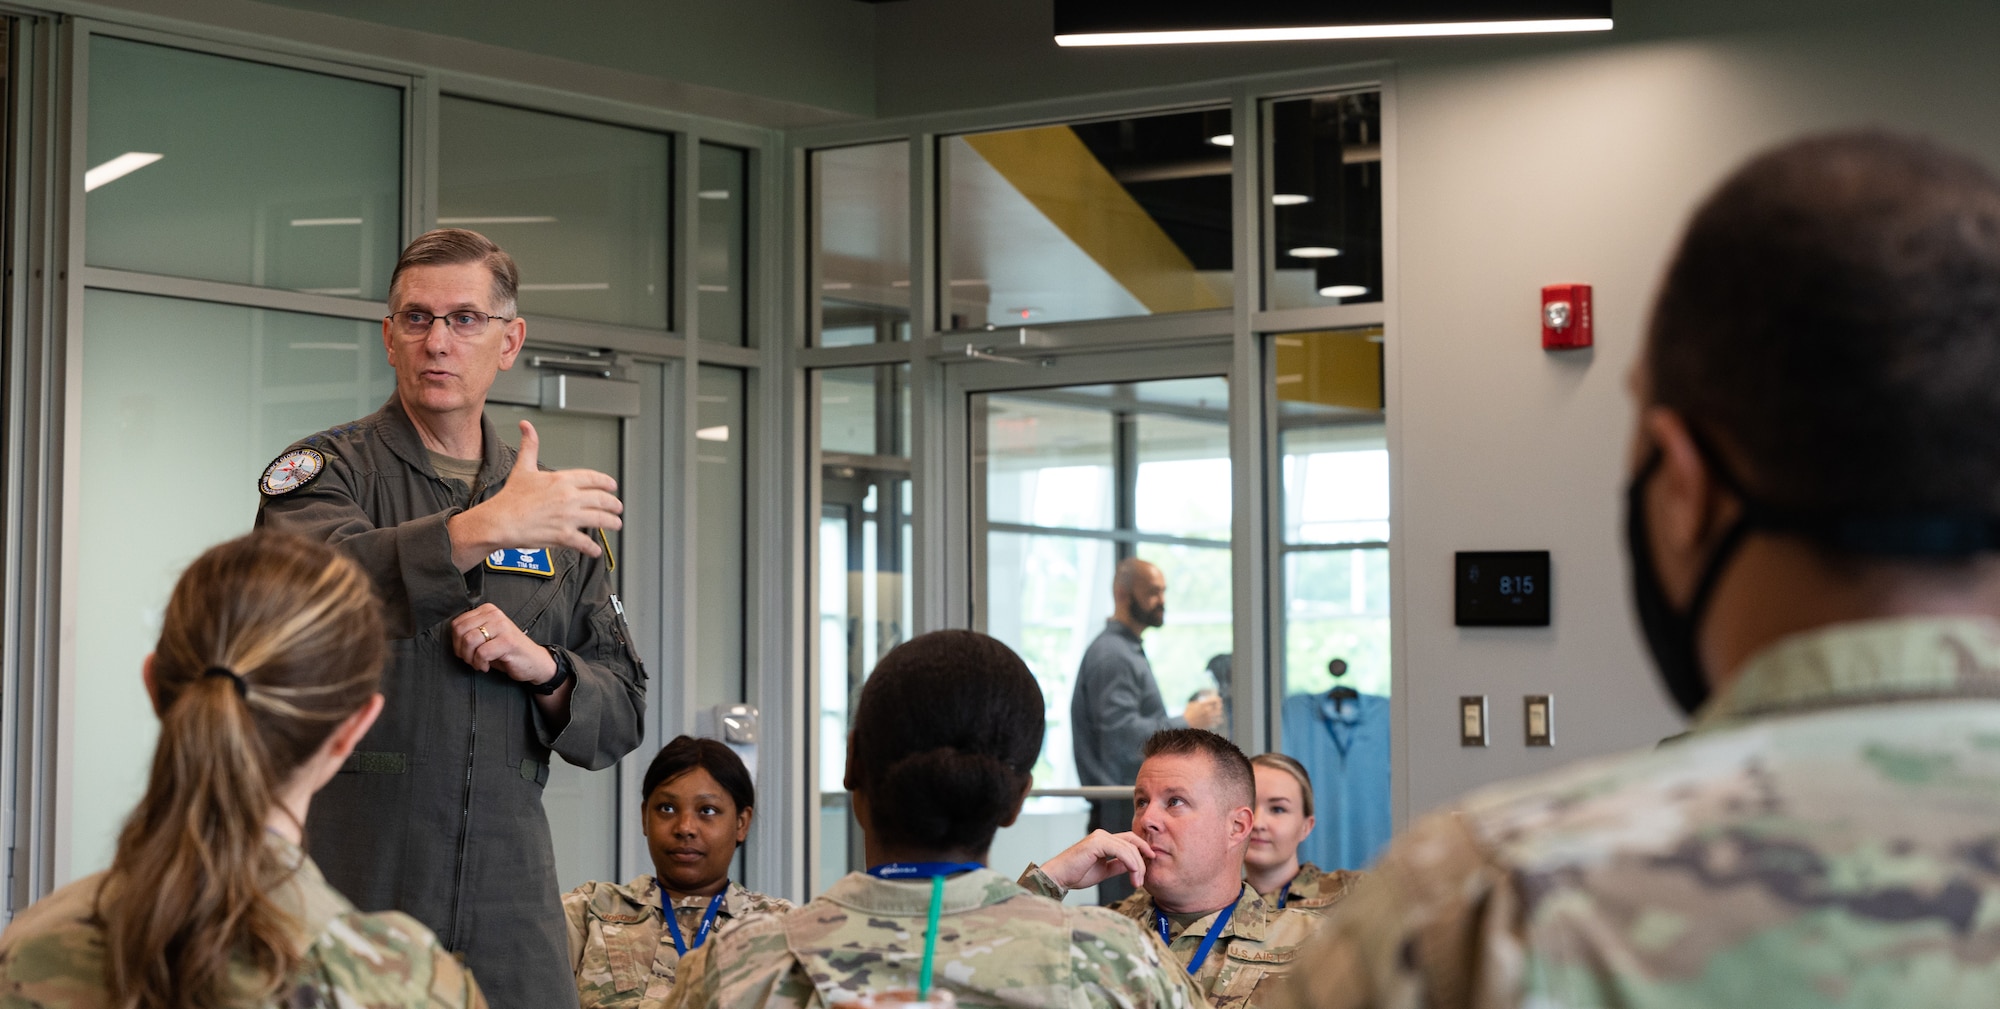 Gen. Timothy Ray, Air Force Global Strike Command commander, welcomes participants and gives introductory remarks during the AFGSC Peer Influencer Conference at the Cyber Innovation Center in Bossier City, Louisiana, June 21, 2021. Victim advocates and peer influencers from installations across AFGSC came together to share ideas and best practices to tackle sexual assault prevention and response. (U.S. Air Force photo by Airman 1st Class Jonathan E. Ramos)